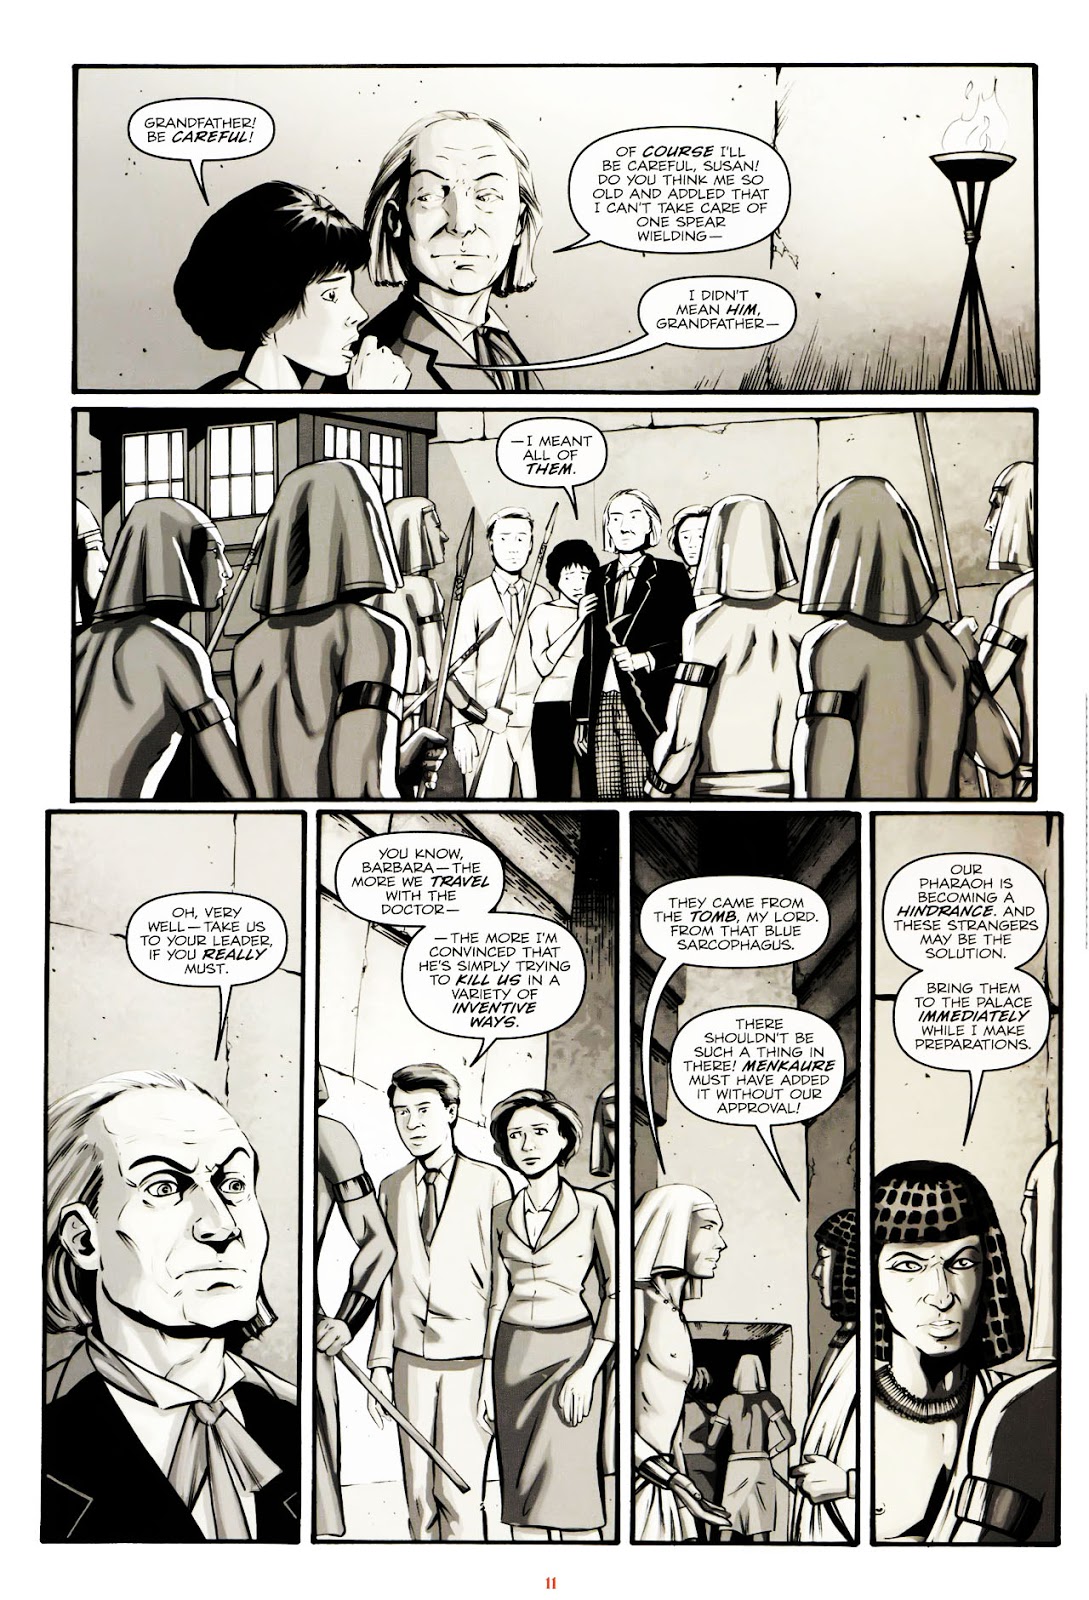 Doctor Who: The Forgotten issue 1 - Page 13